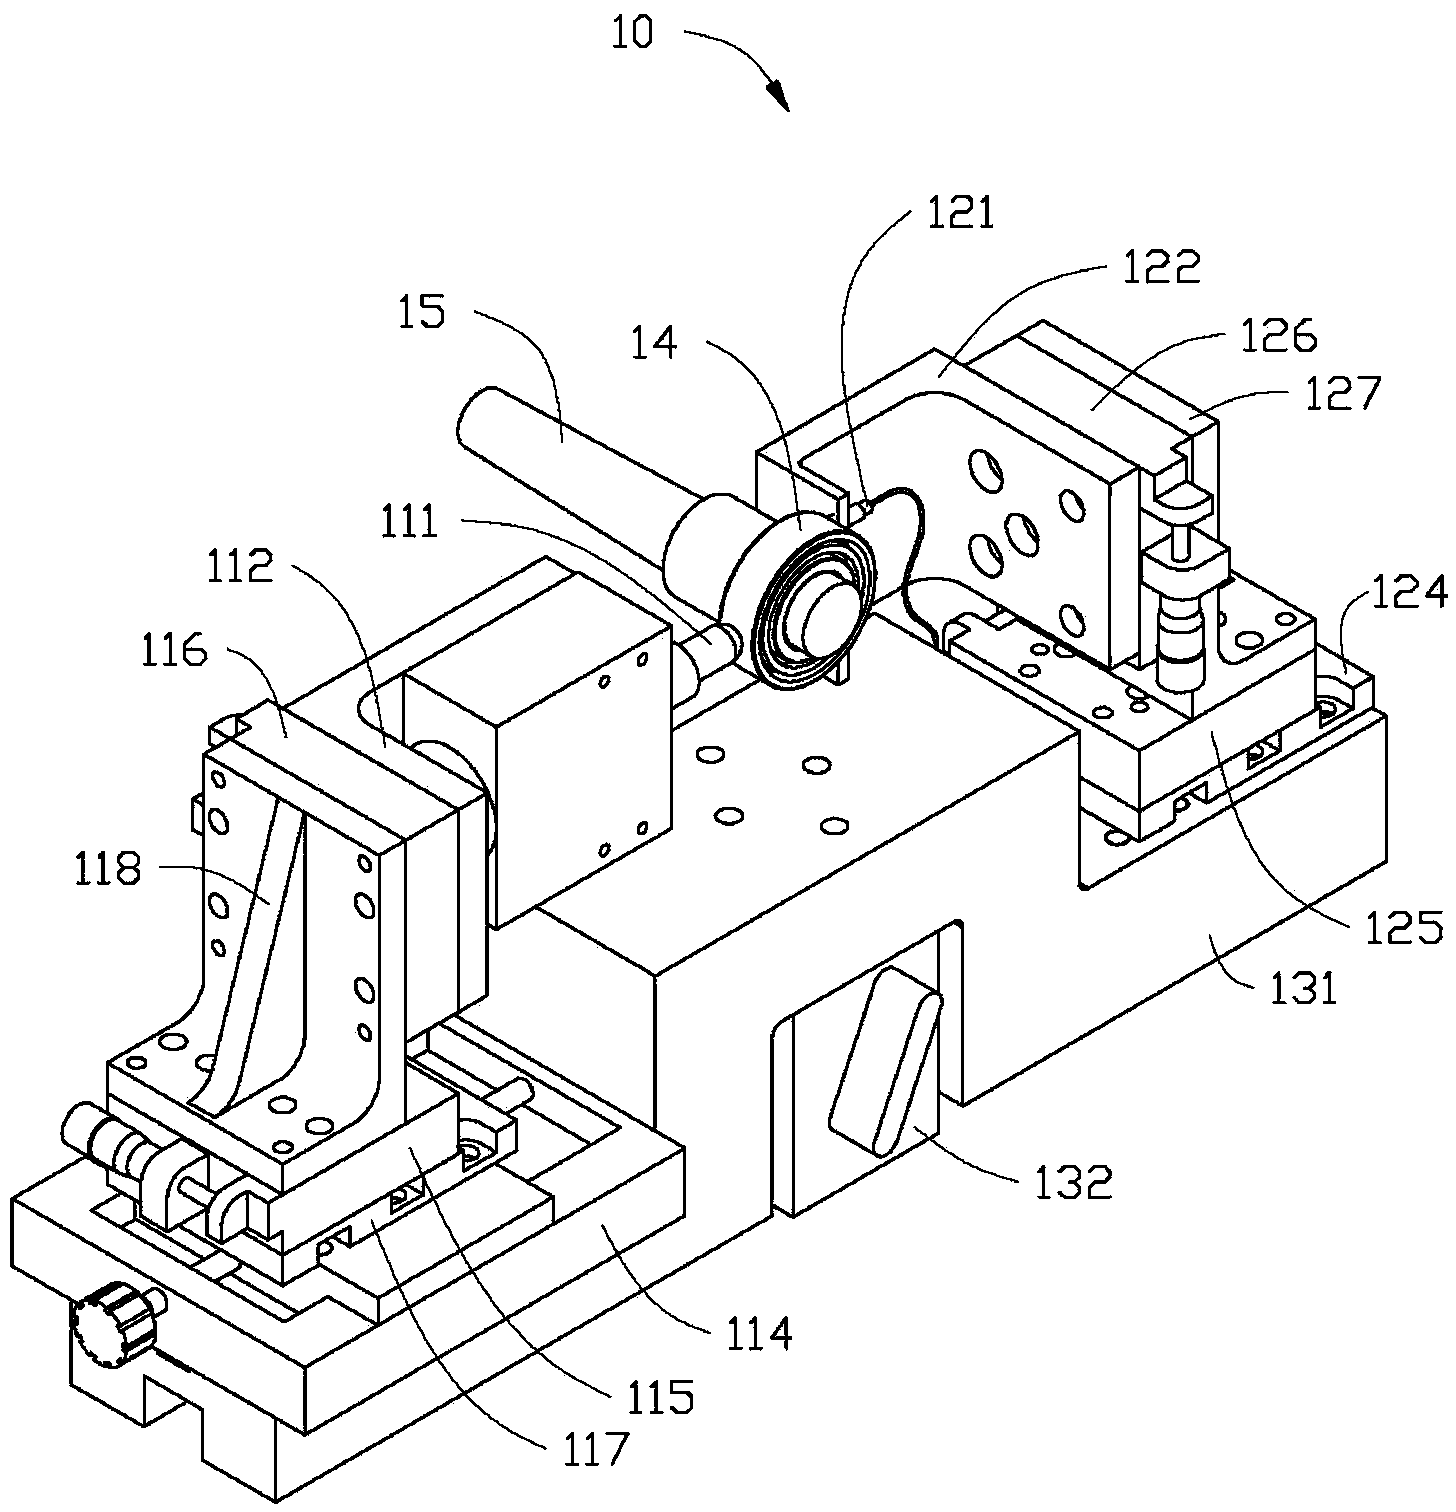 Rolling bearing vibration detection device and analysis method